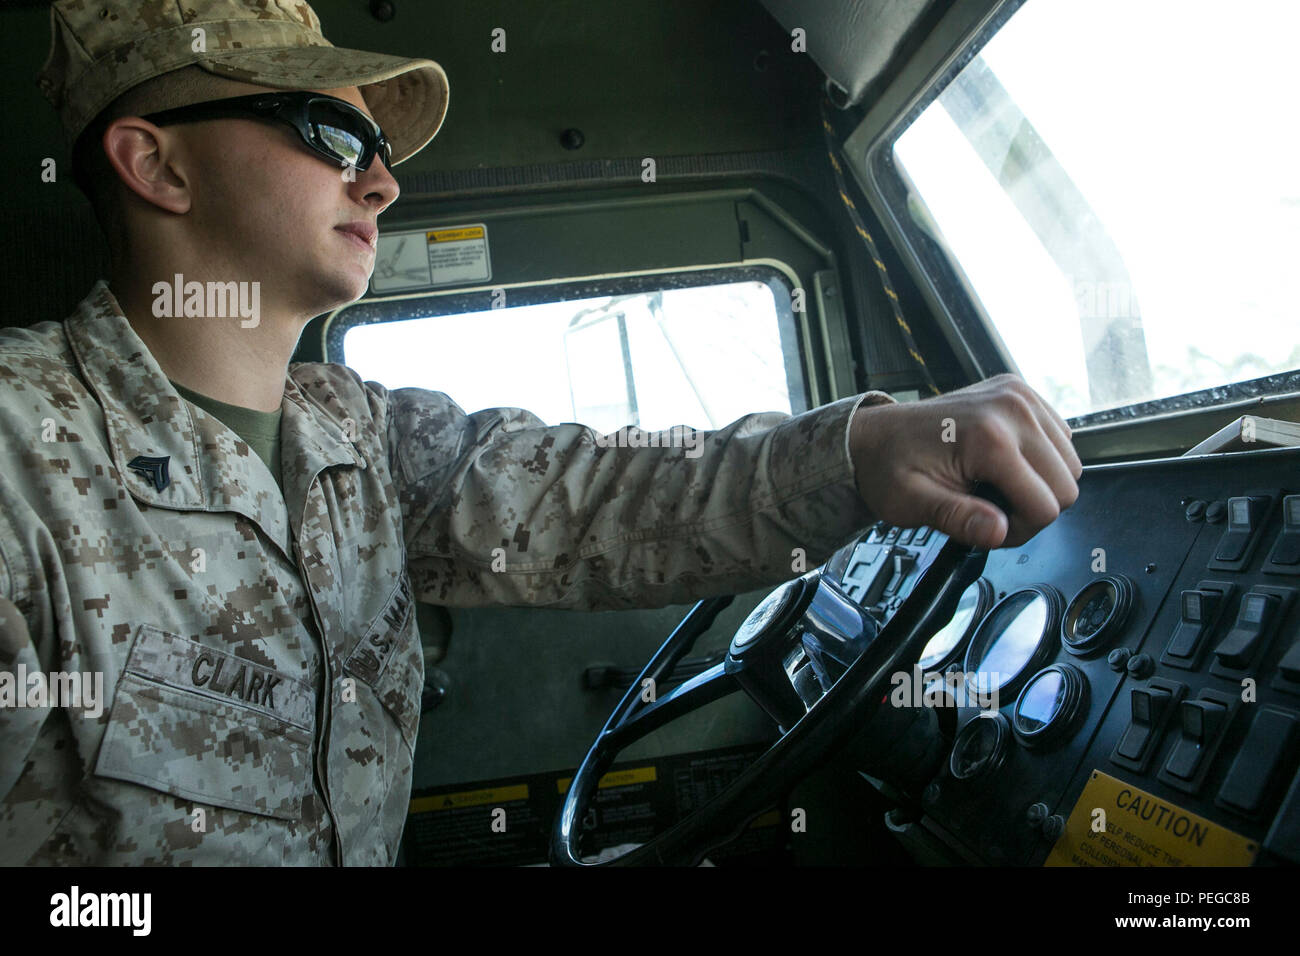 U.S. Marine Corps Cpl. Tommy Clark, with Combat Logistics Battalion 31, 31st Marine Expeditionary Unit, drives a 7-ton truck loaded with water from the USS Ashland (LSD 48) to a distribution site as part of typhoon relief efforts in Saipan, Aug. 11, 2015. The 31st MEU and the ships of the Bonhomme Richard Amphibious Ready Group are assisting the Federal Emergency Management Agency with distributing emergency relief supplies to Saipan after the island was struck by Typhoon Soudelor, Aug. 2-3. (U.S. Marine Corps photo by Lance Cpl. Brian Bekkala/Released.) Stock Photo